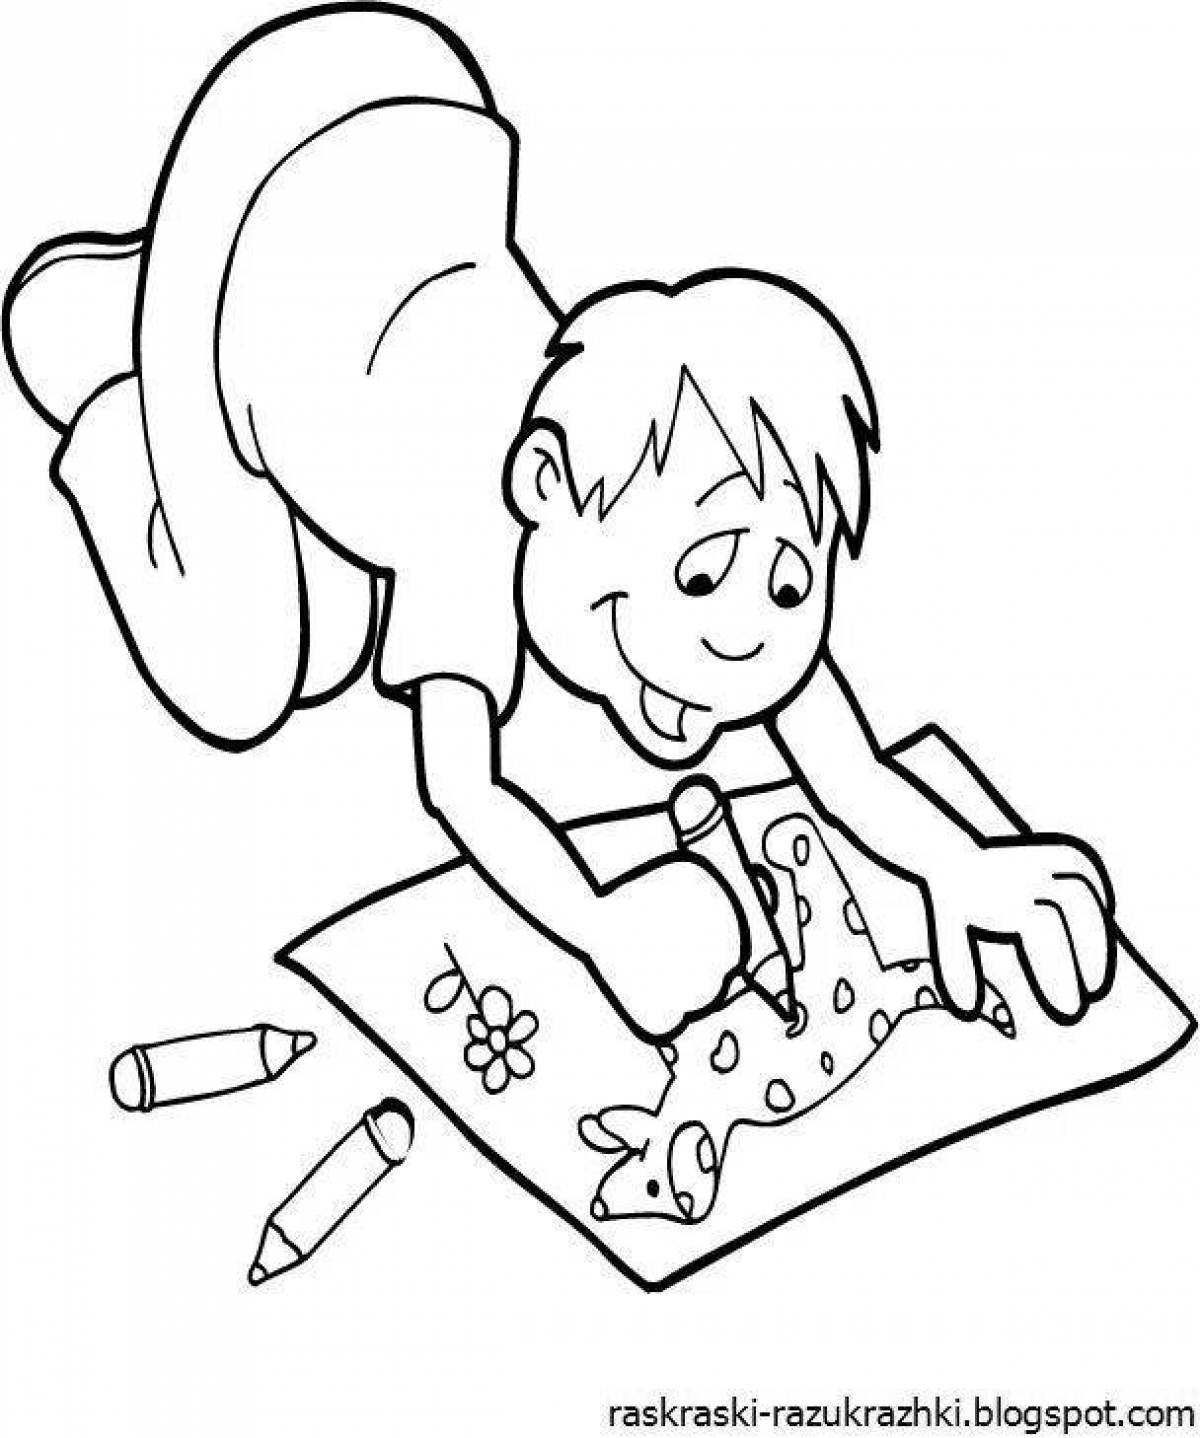 Adorable coloring page drawing